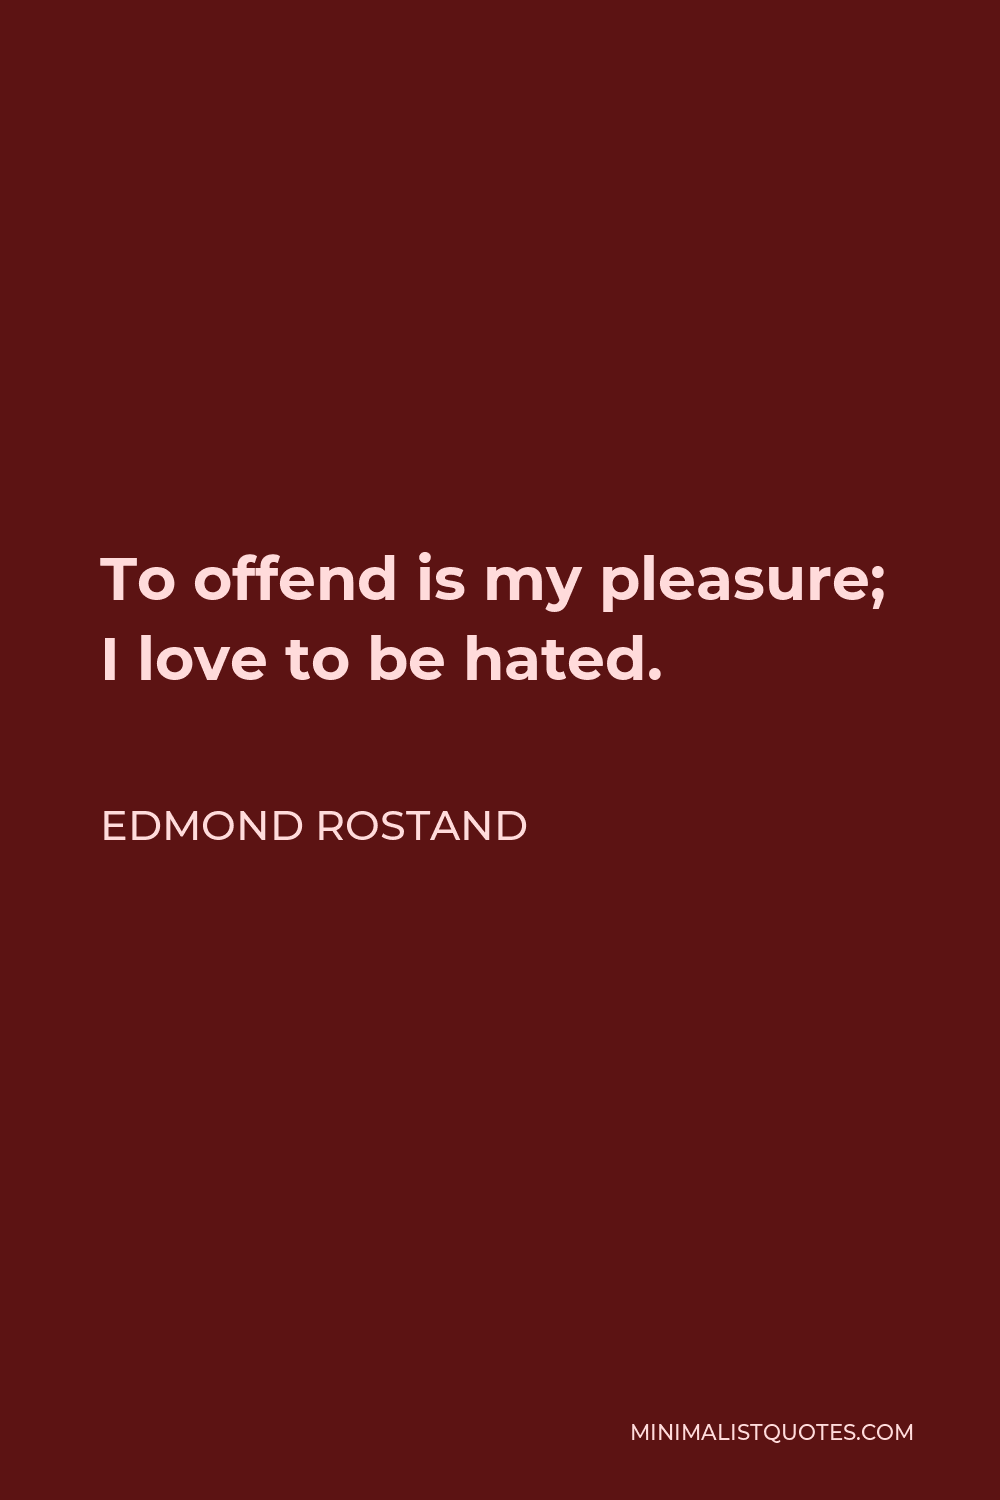 Edmond Rostand Quote - To offend is my pleasure; I love to be hated.